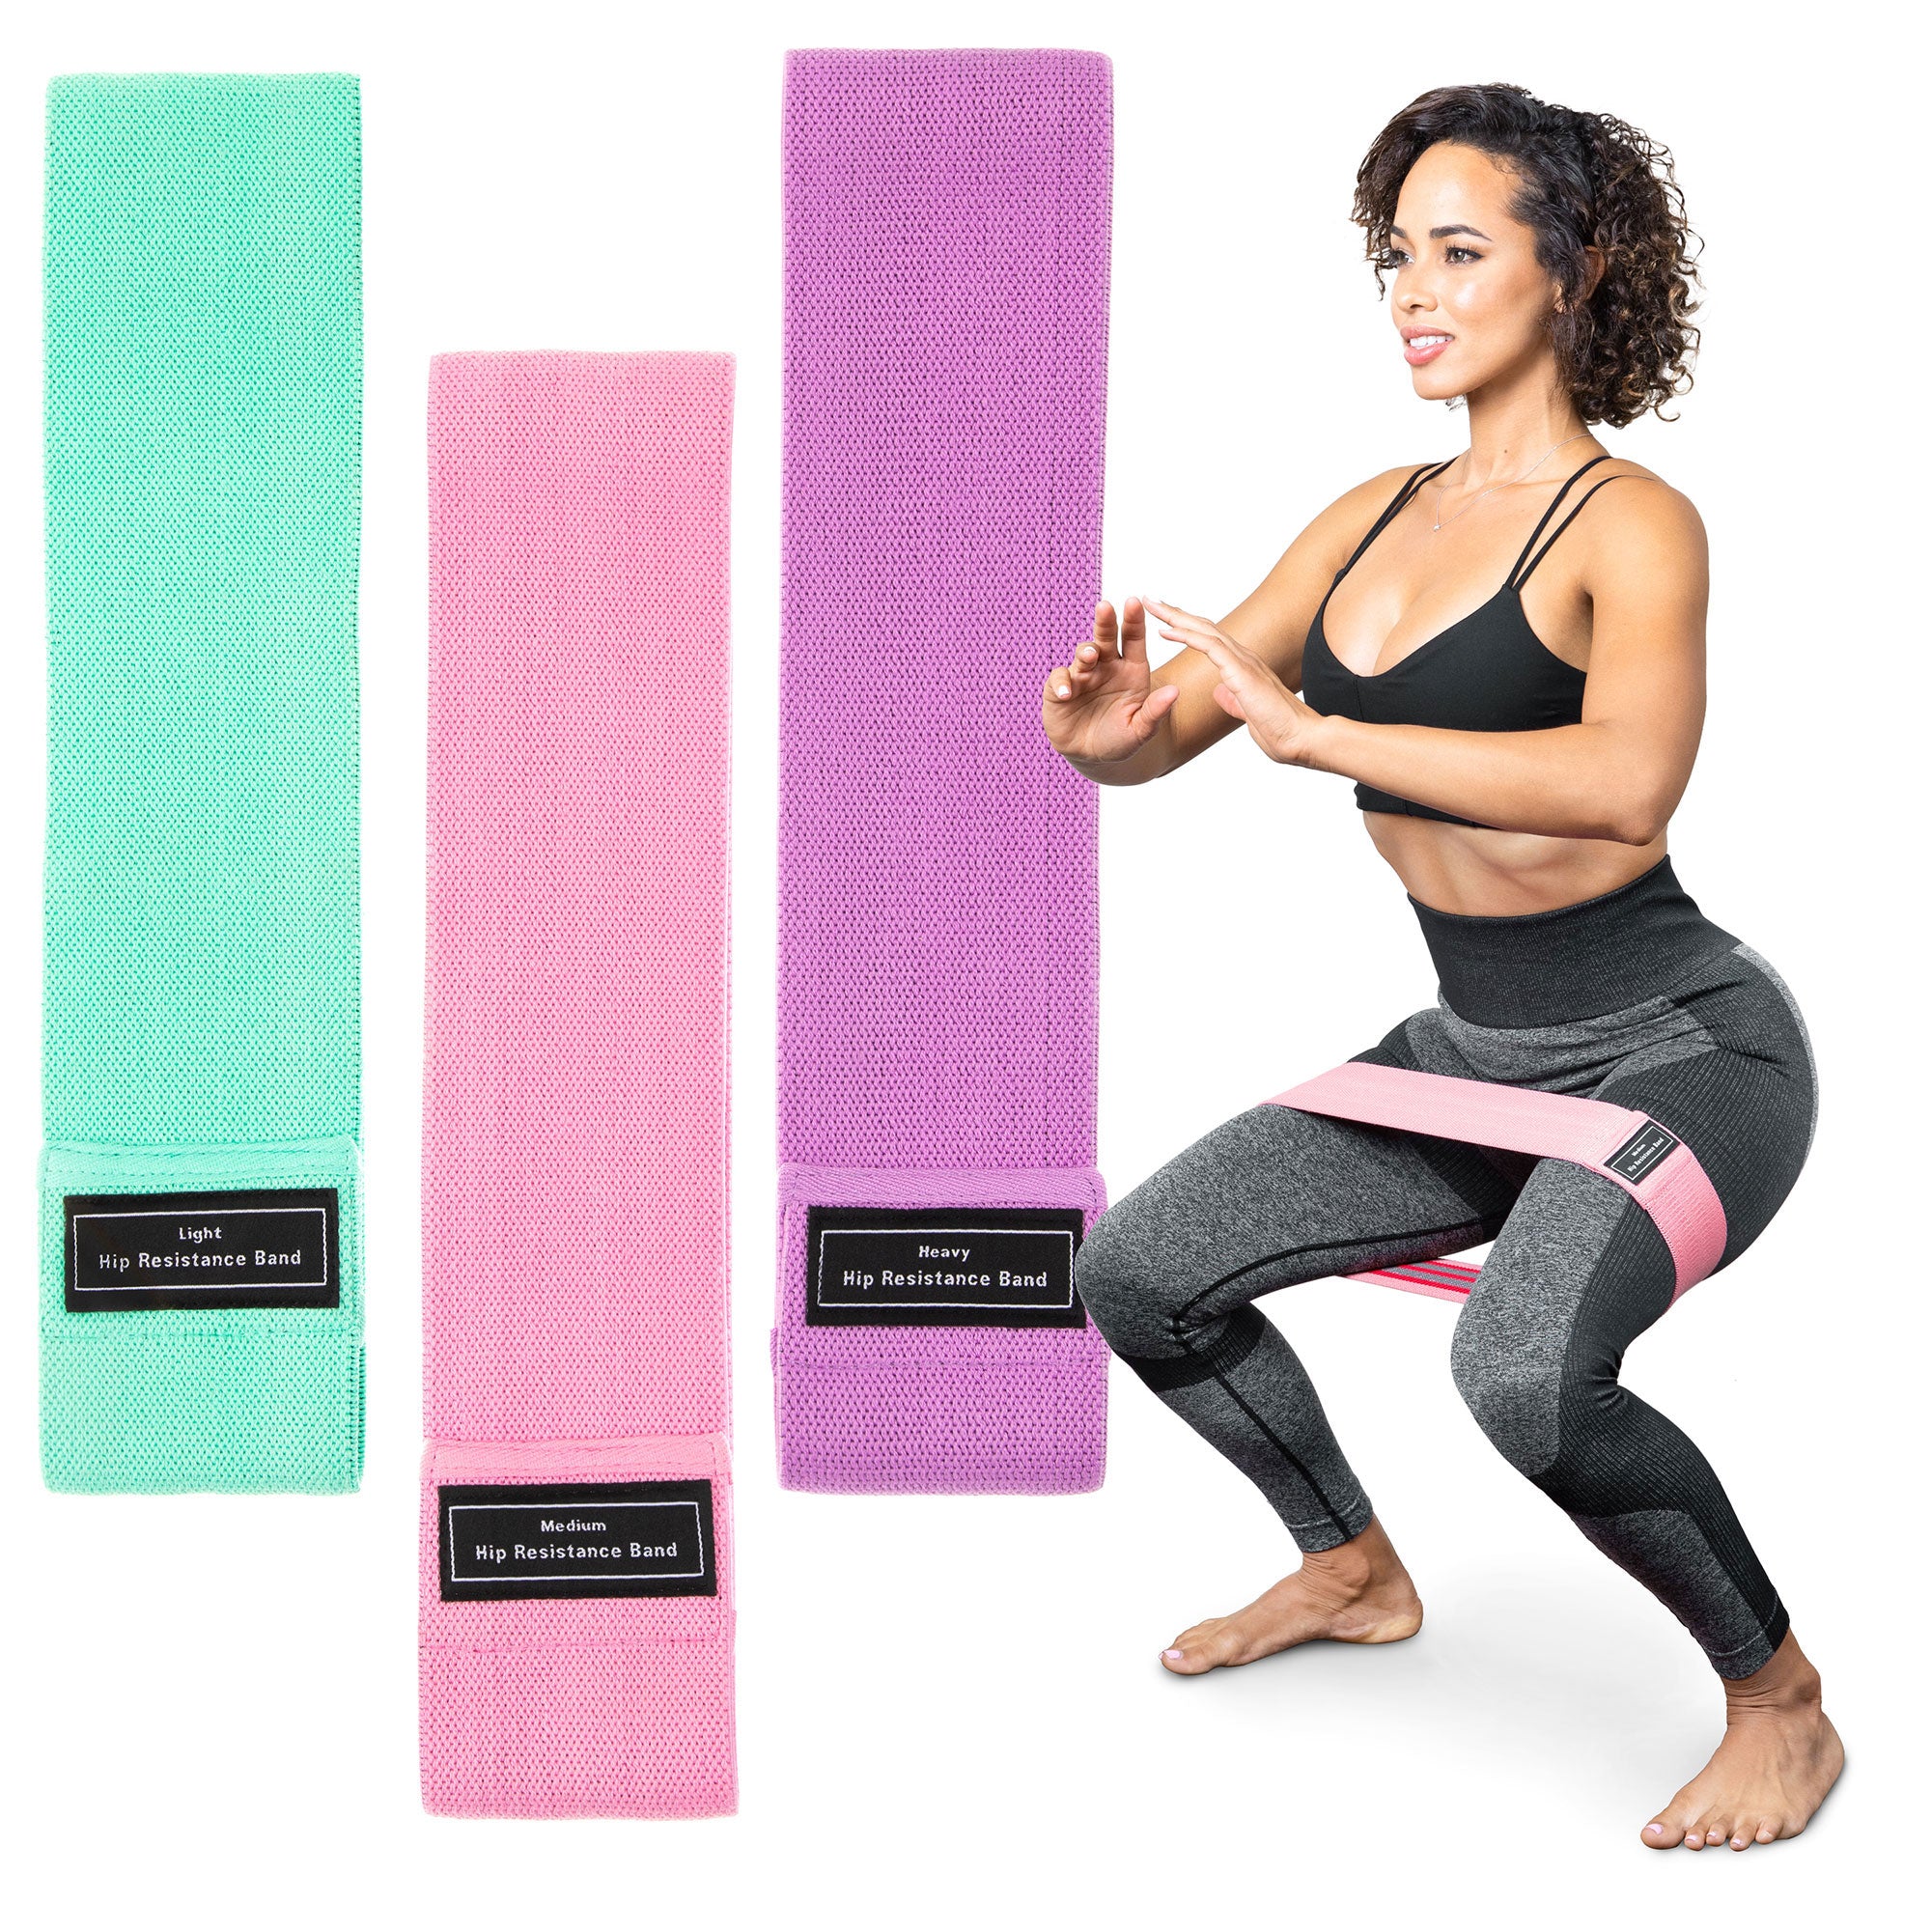 Serenily Resistant Bands for Women - Exercise Bands for Working